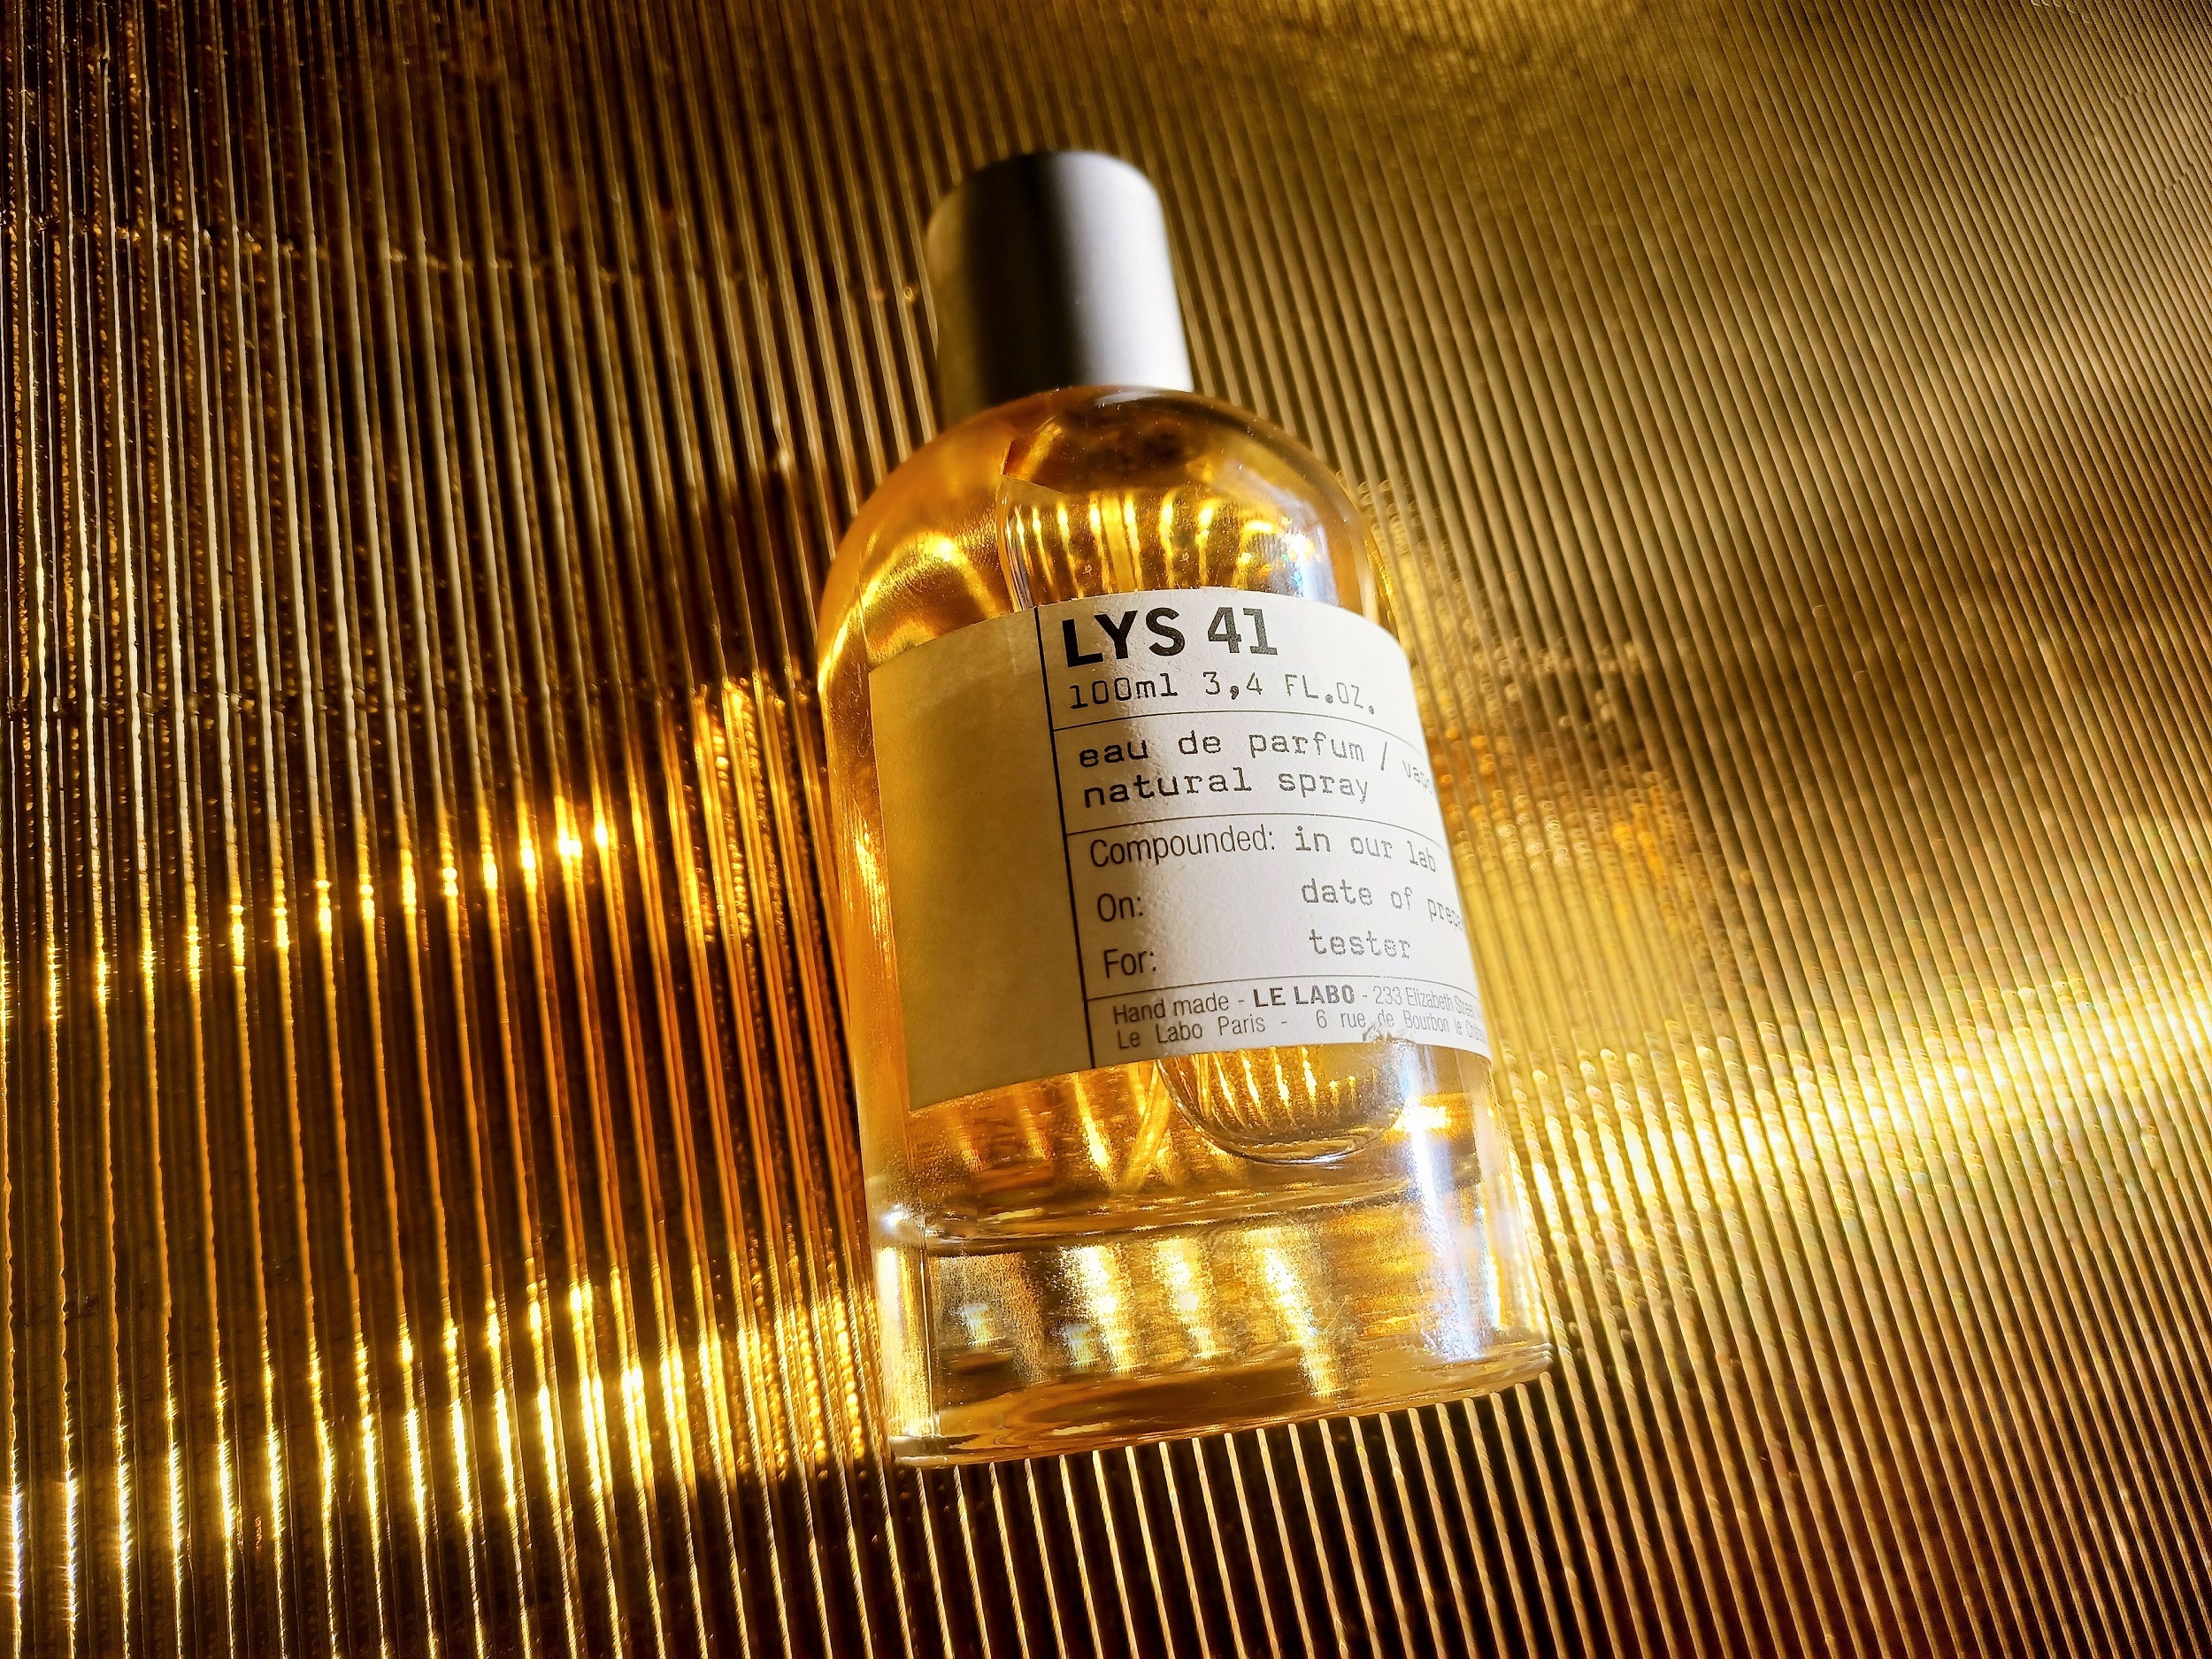 Best Le Labo Fragrances From The Niche Standard-Setter